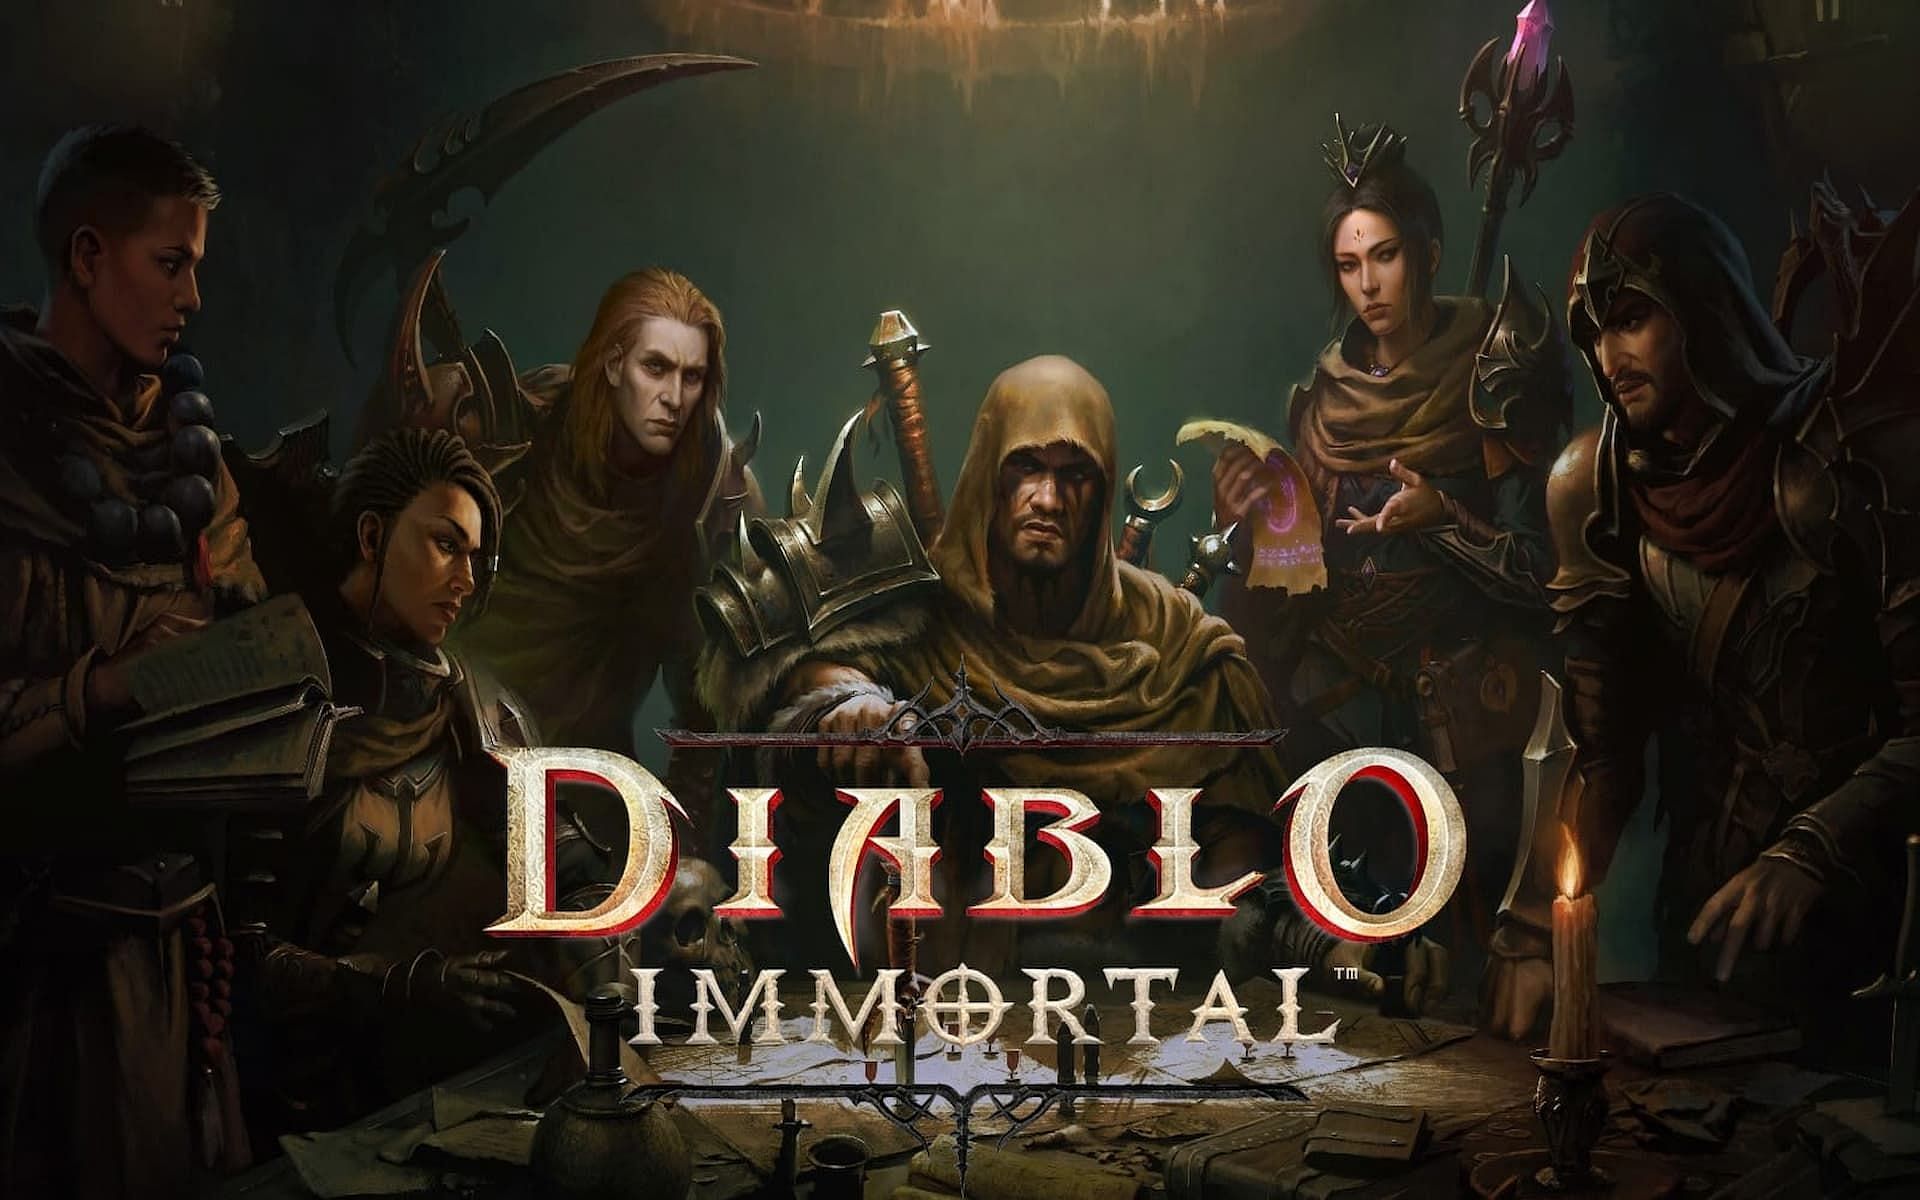 Oh Yes, 'Diablo Immortal' Is Absolutely Pay-To-Win, Eventually